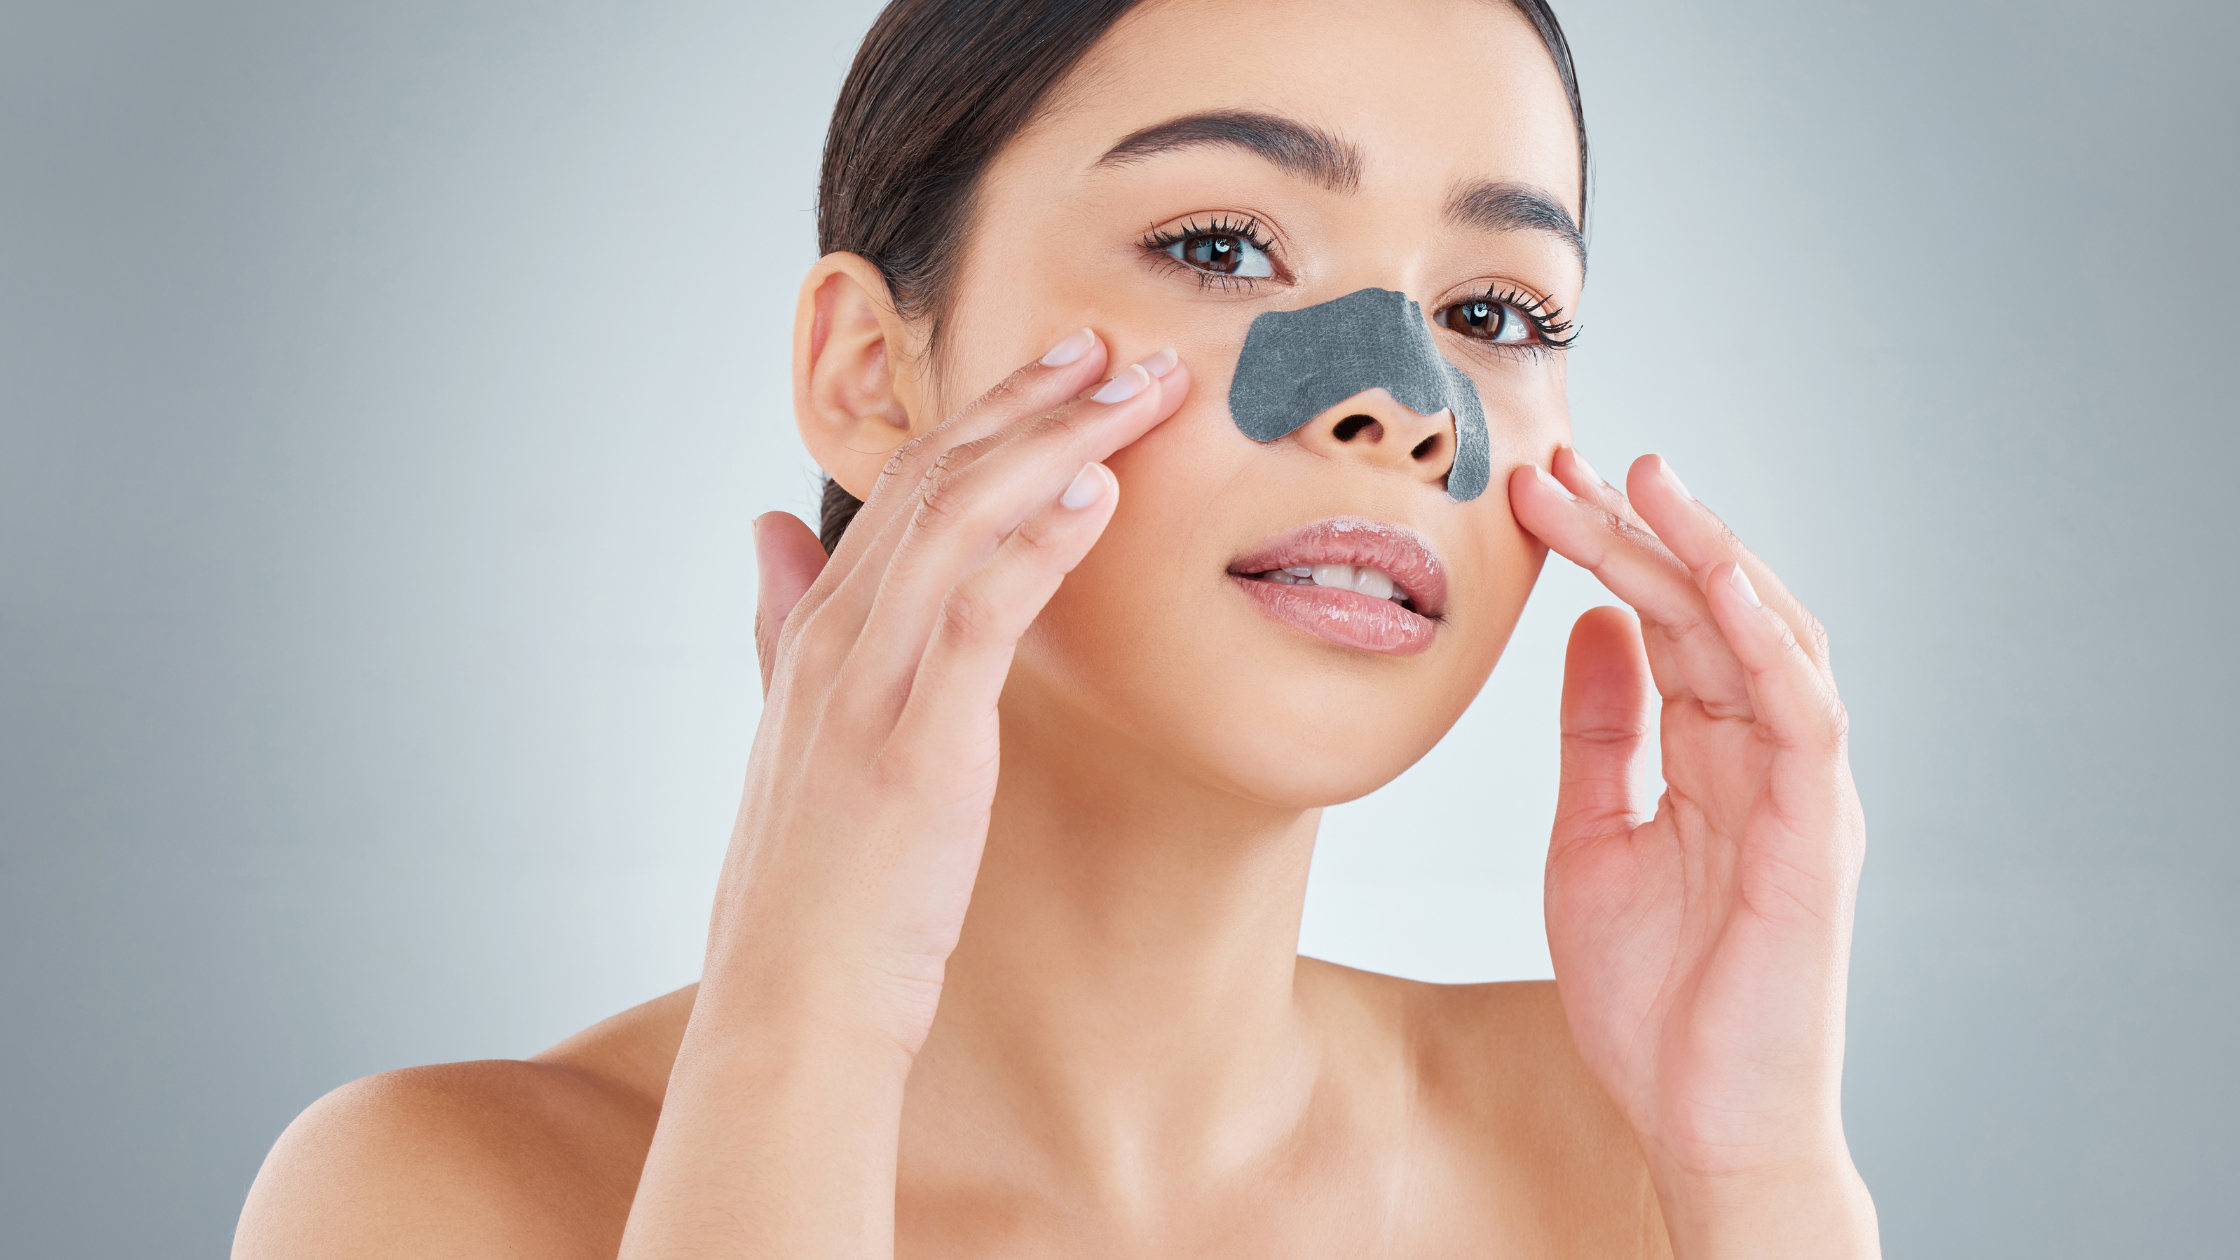 How to Minimize Pores For Smooth Skin